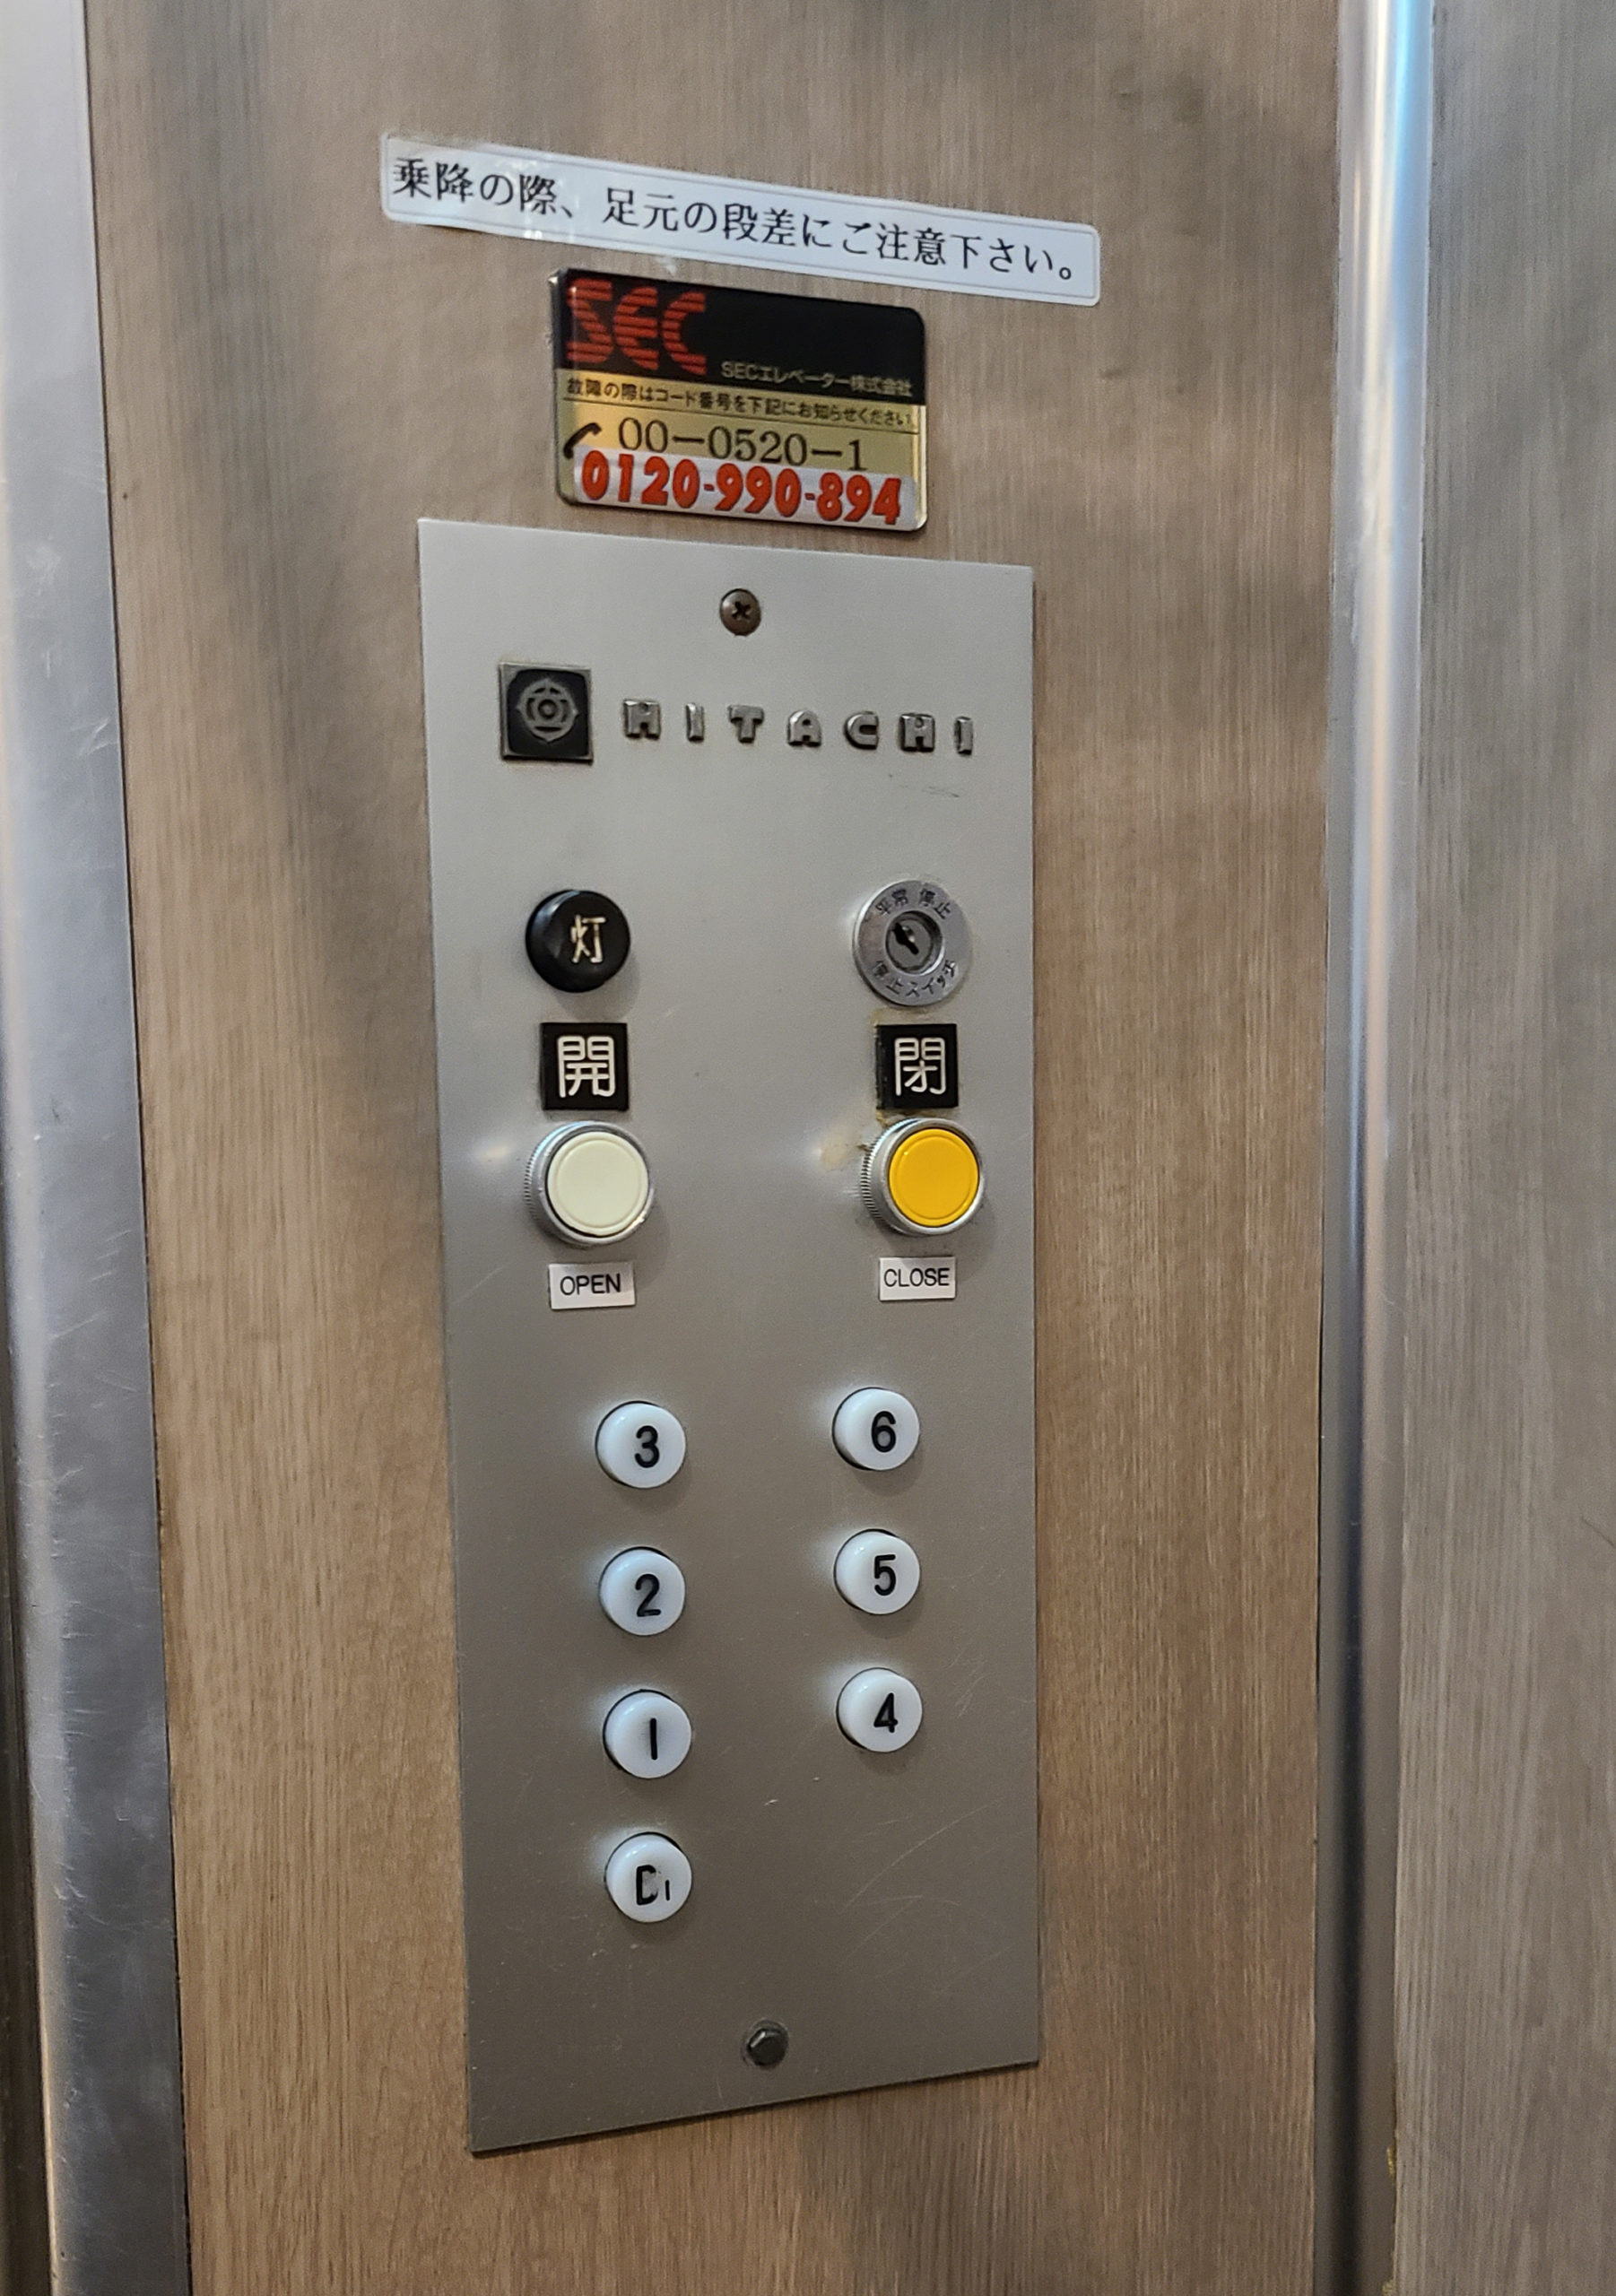 The elevator will its all-original buttons